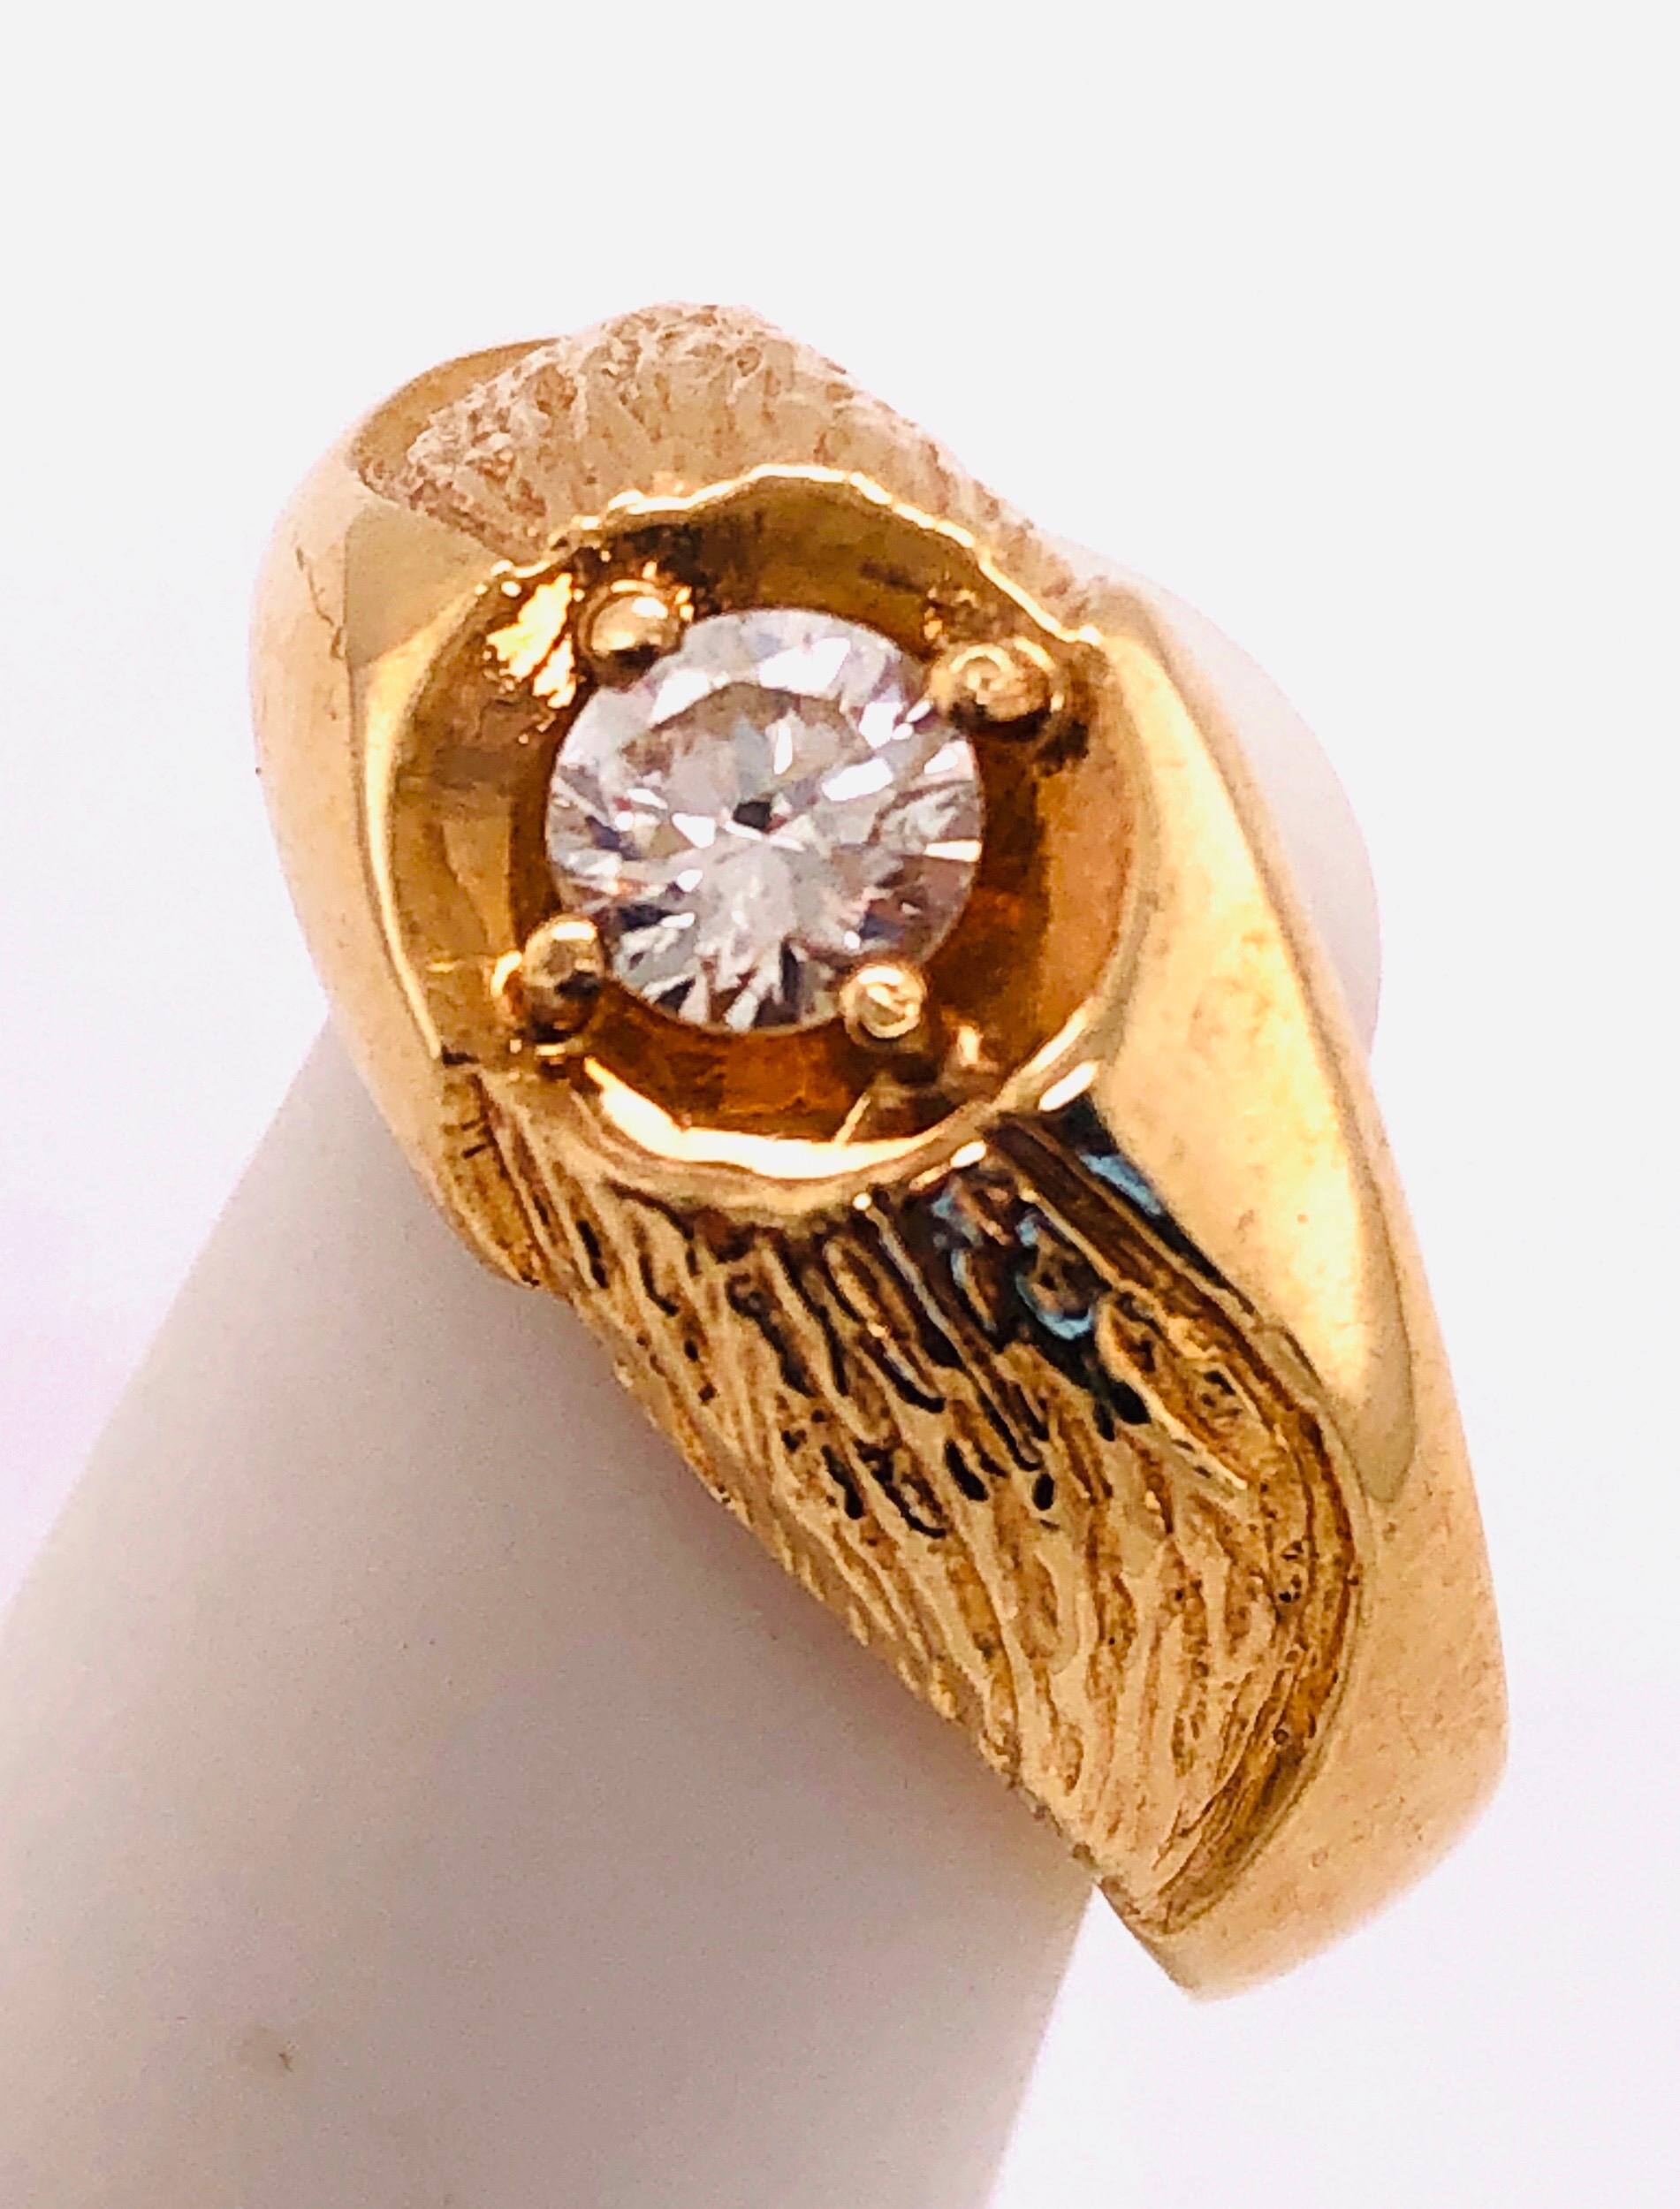 14Kt Yellow Gold Fashion Ring With Solitaire Round Diamond
Size 9
4.70 grams total weight